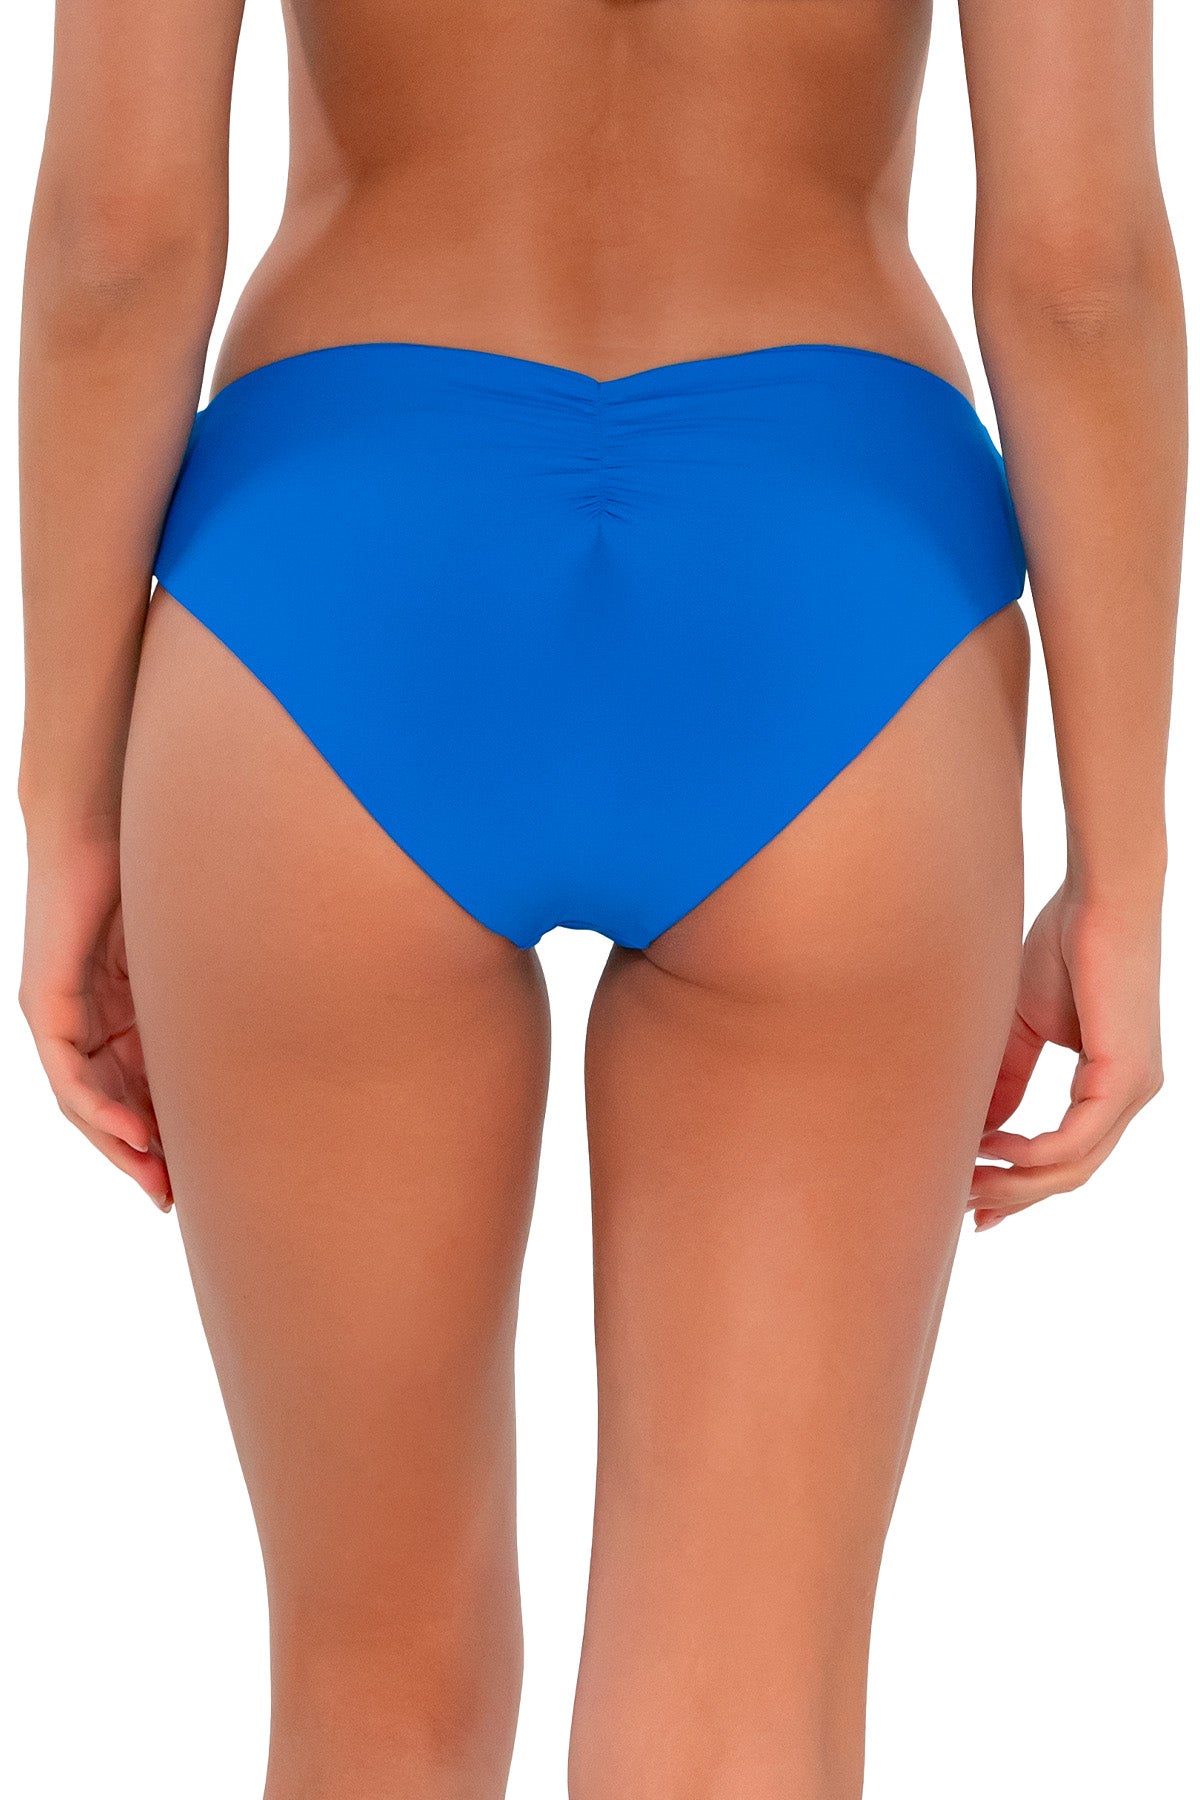 Back pose #3 of Daria wearing Sunsets Electric Blue Alana Reversible Hipster Bottom